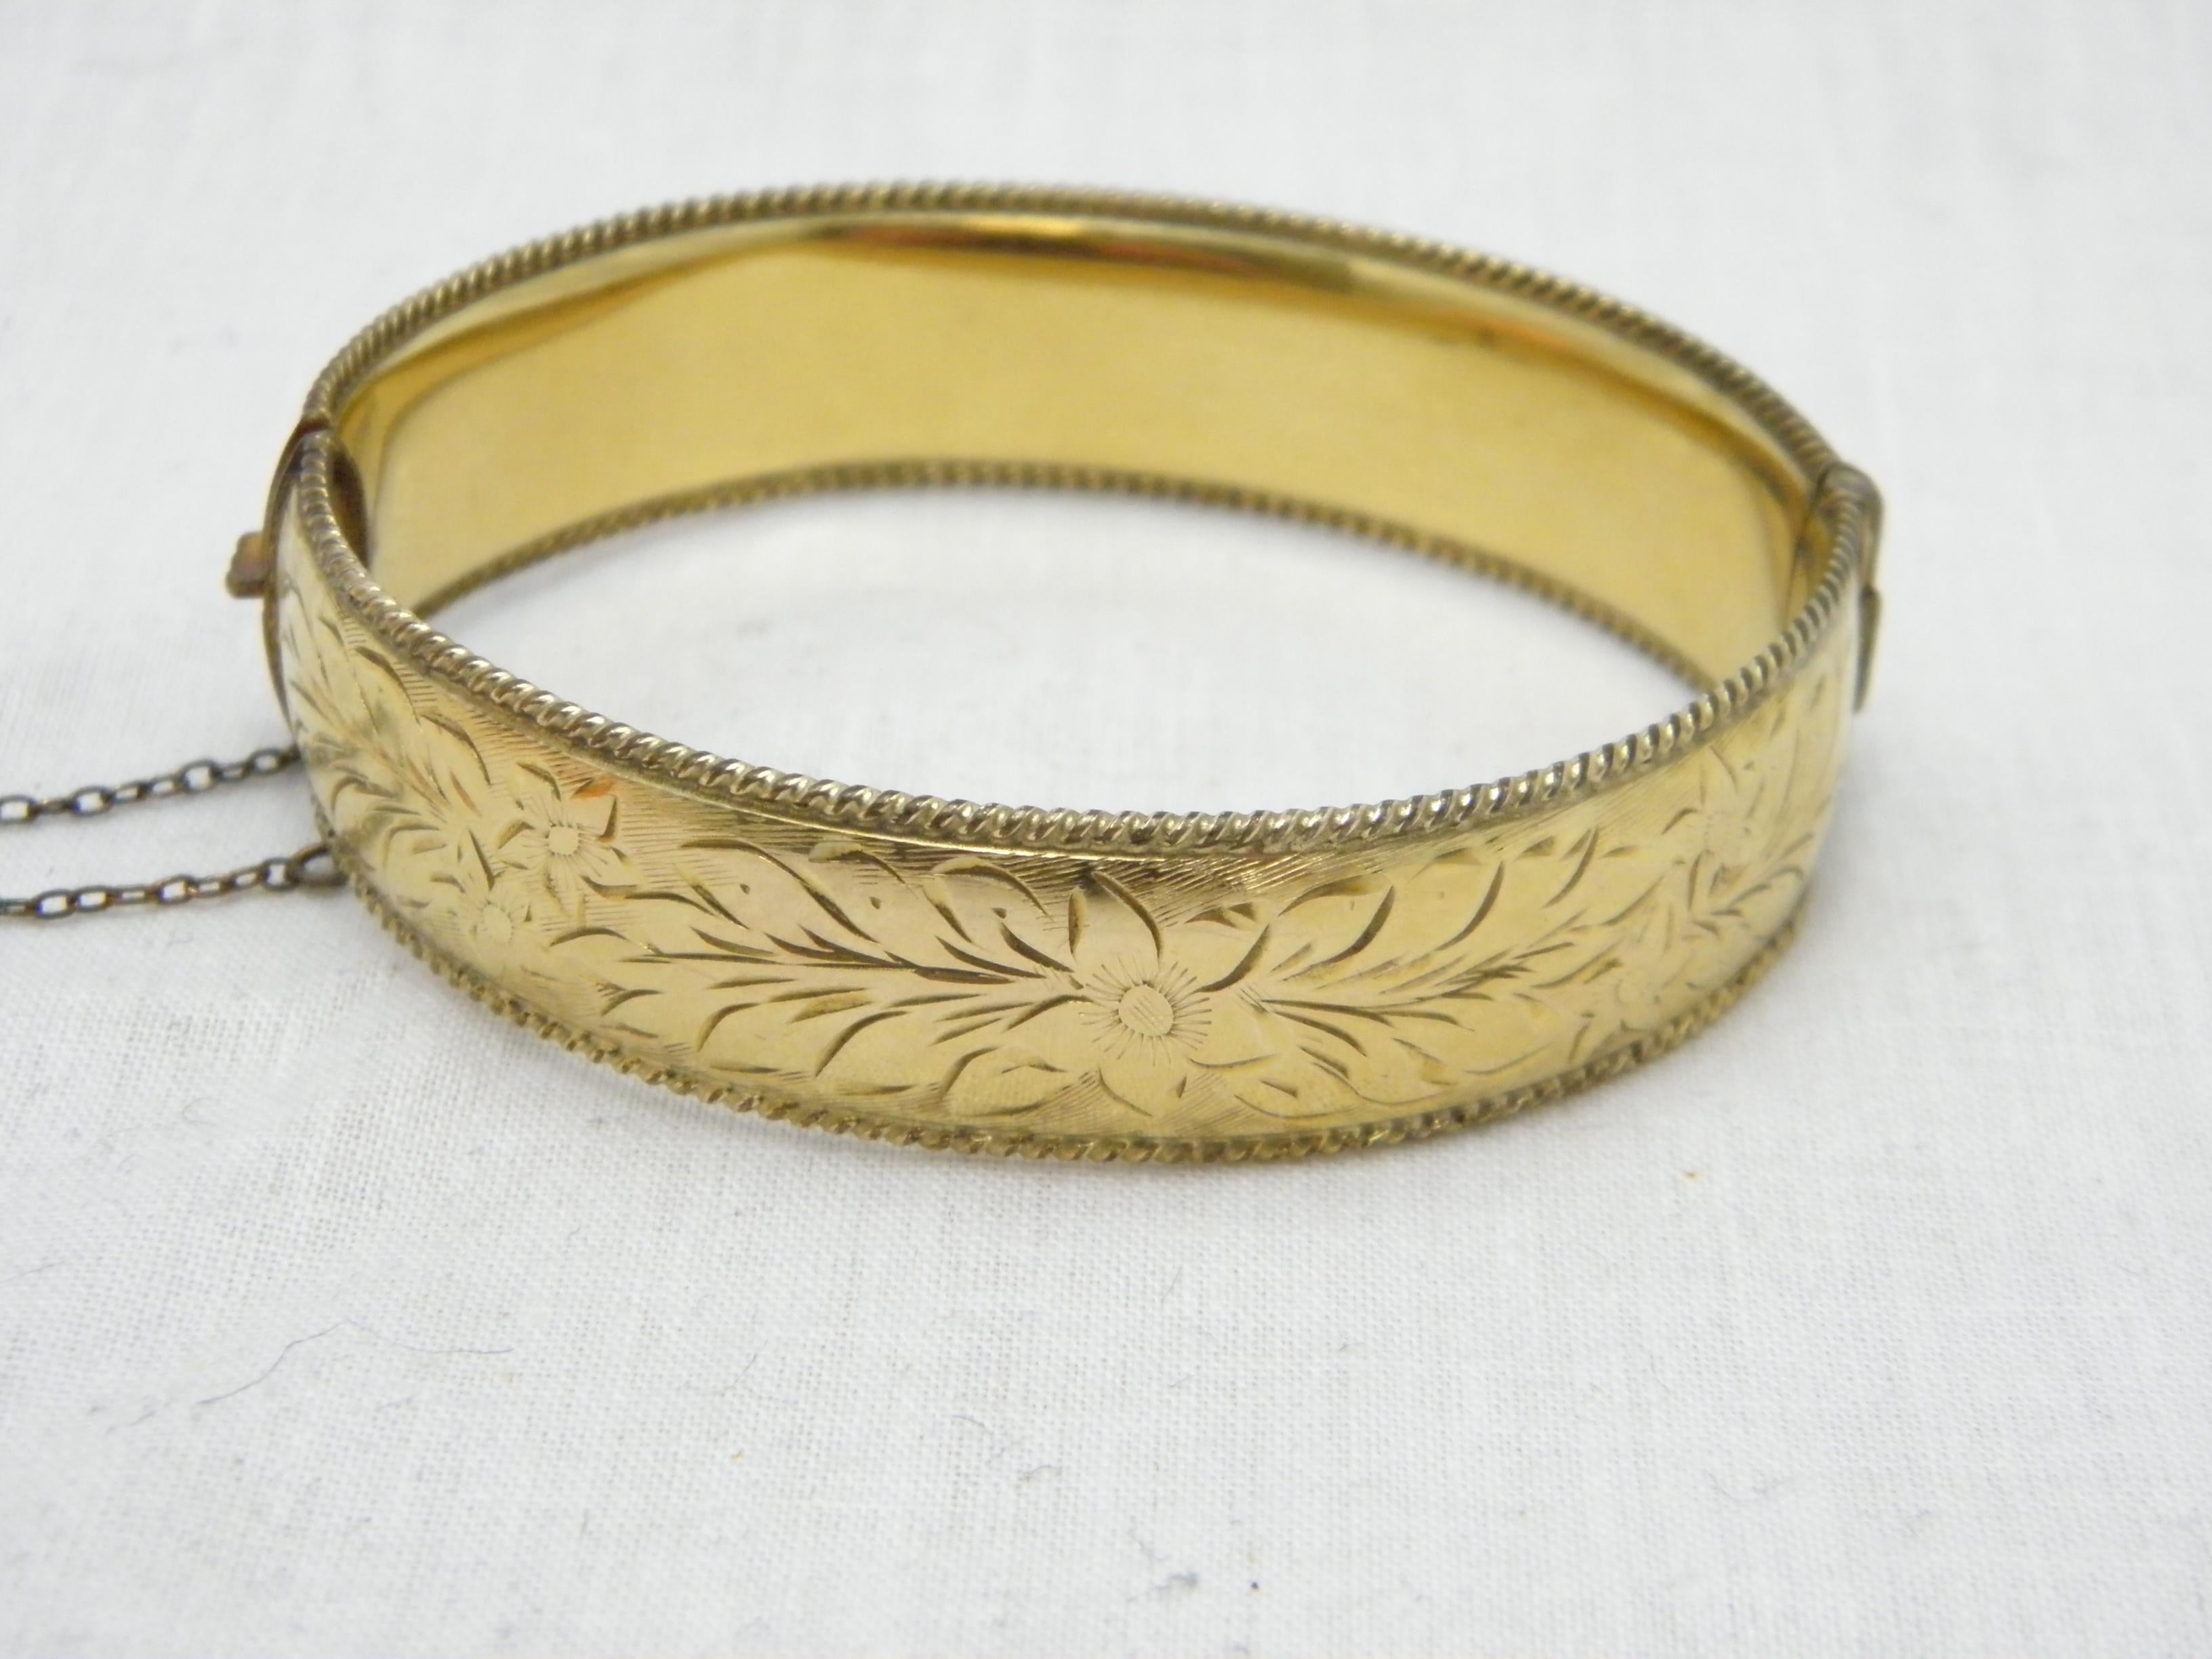 If you have landed on this page then you have an eye for beauty.

On offer is this gorgeous
9CT GOLD METAL CORED FLORAL ENGRAVED HINGED BANGLE BRACELET

DETAILS
Material: Thick 9ct Gold with Metal Core (see details below)
Style: Hinged Cuff with